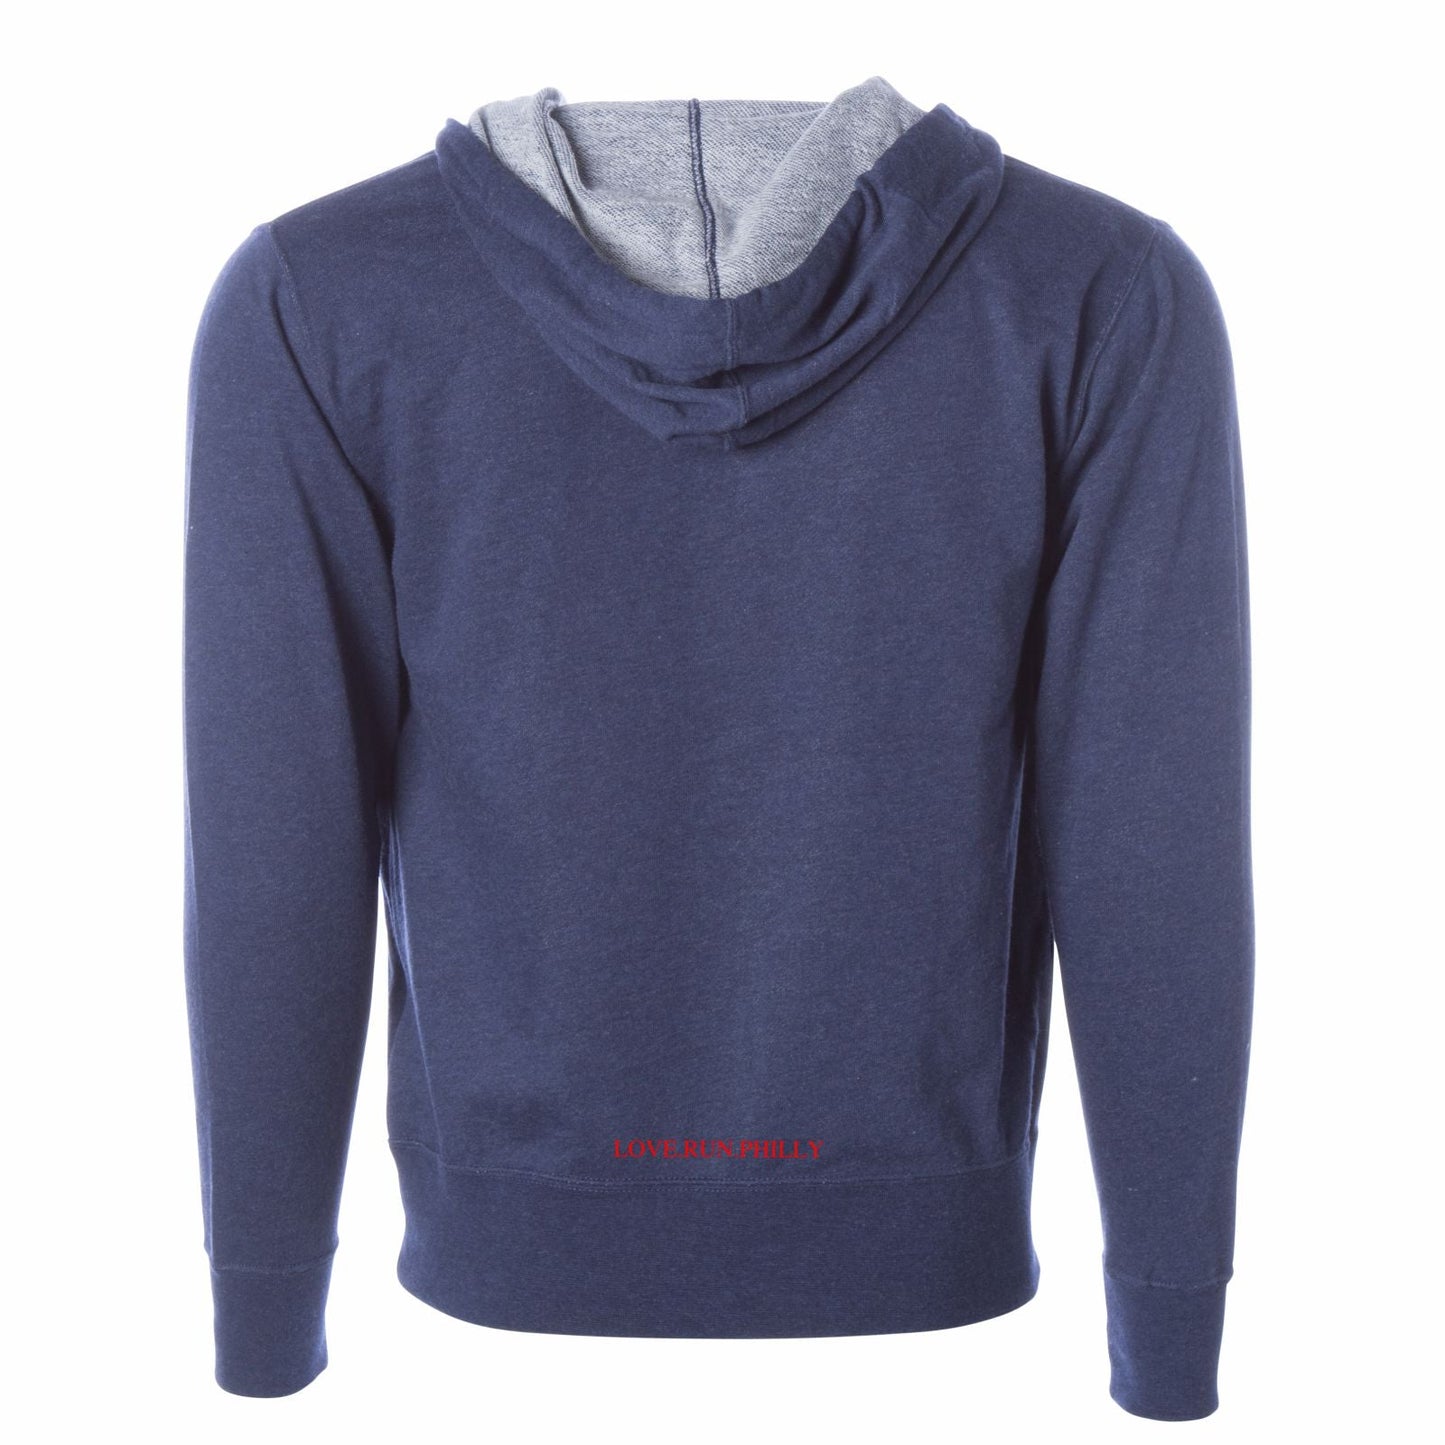 Adult French Terry Zip Hoody -Navy Heather- Embroidery